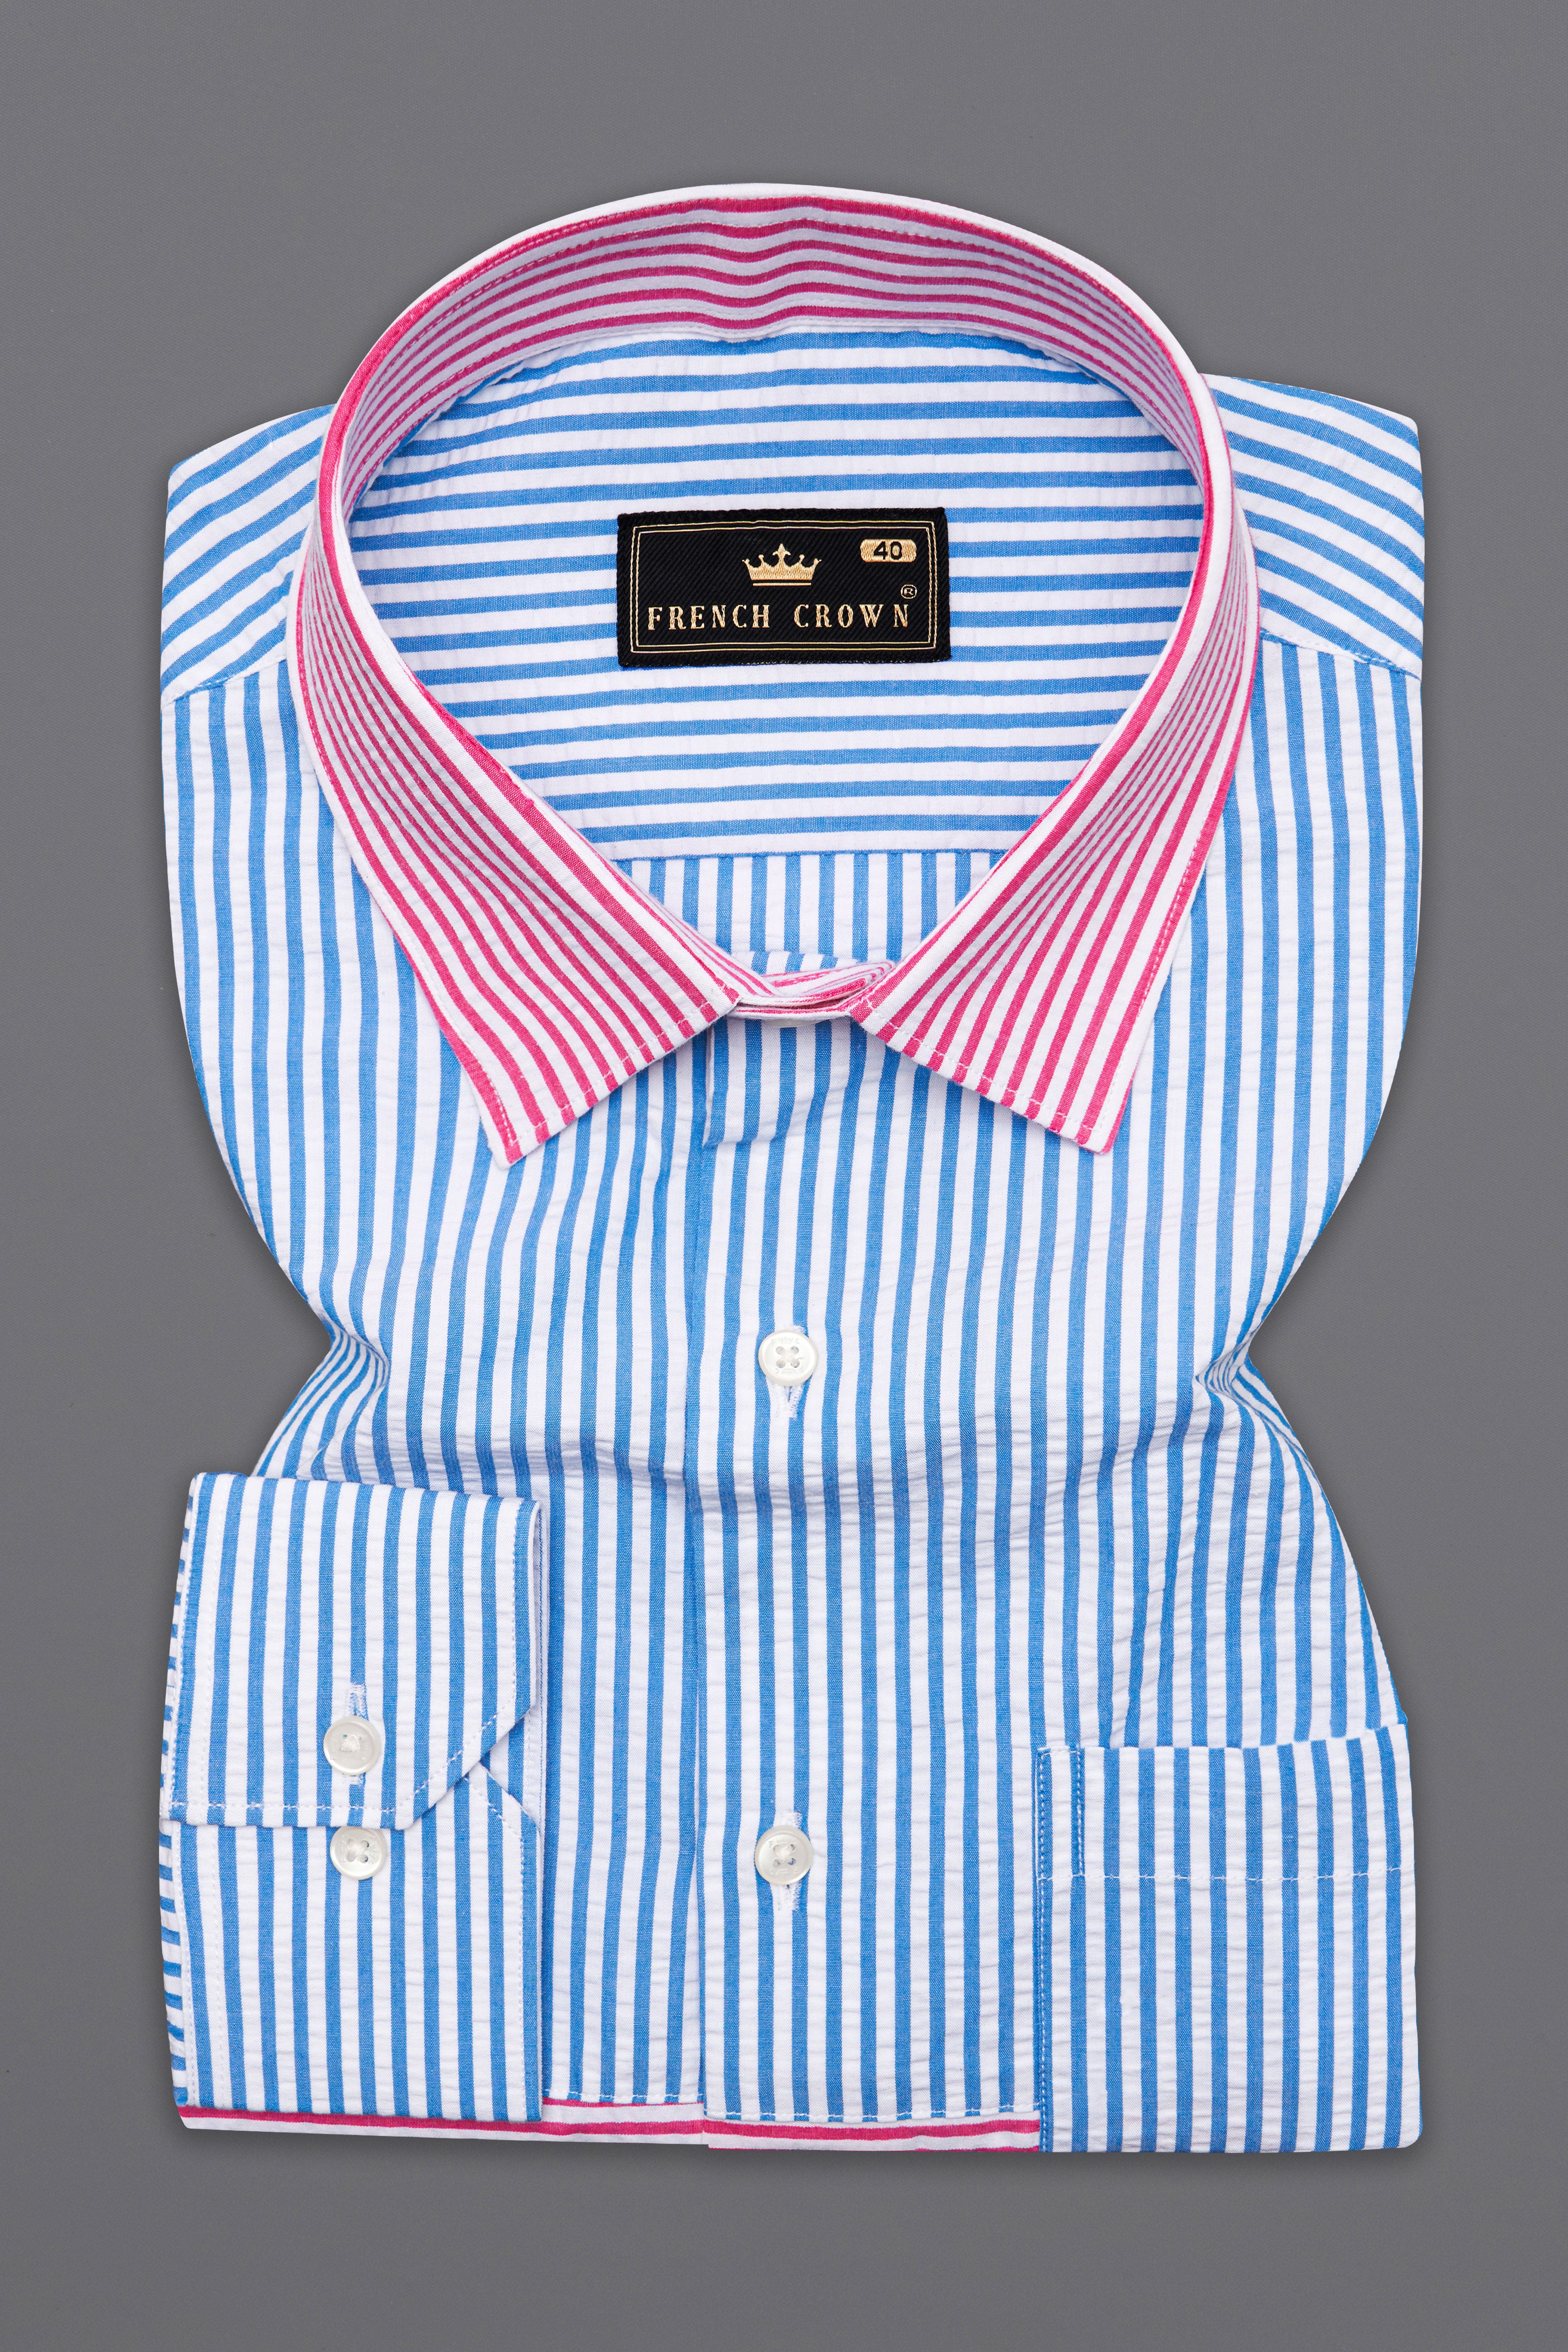 Glacial Blue with White and Thulian Pink Striped Seersucker Designer Shirt 10151-P508-38, 10151-P508-H-38, 10151-P508-39, 10151-P508-H-39, 10151-P508-40, 10151-P508-H-40, 10151-P508-42, 10151-P508-H-42, 10151-P508-44, 10151-P508-H-44, 10151-P508-46, 10151-P508-H-46, 10151-P508-48, 10151-P508-H-48, 10151-P508-50, 10151-P508-H-50, 10151-P508-52, 10151-P508-H-52